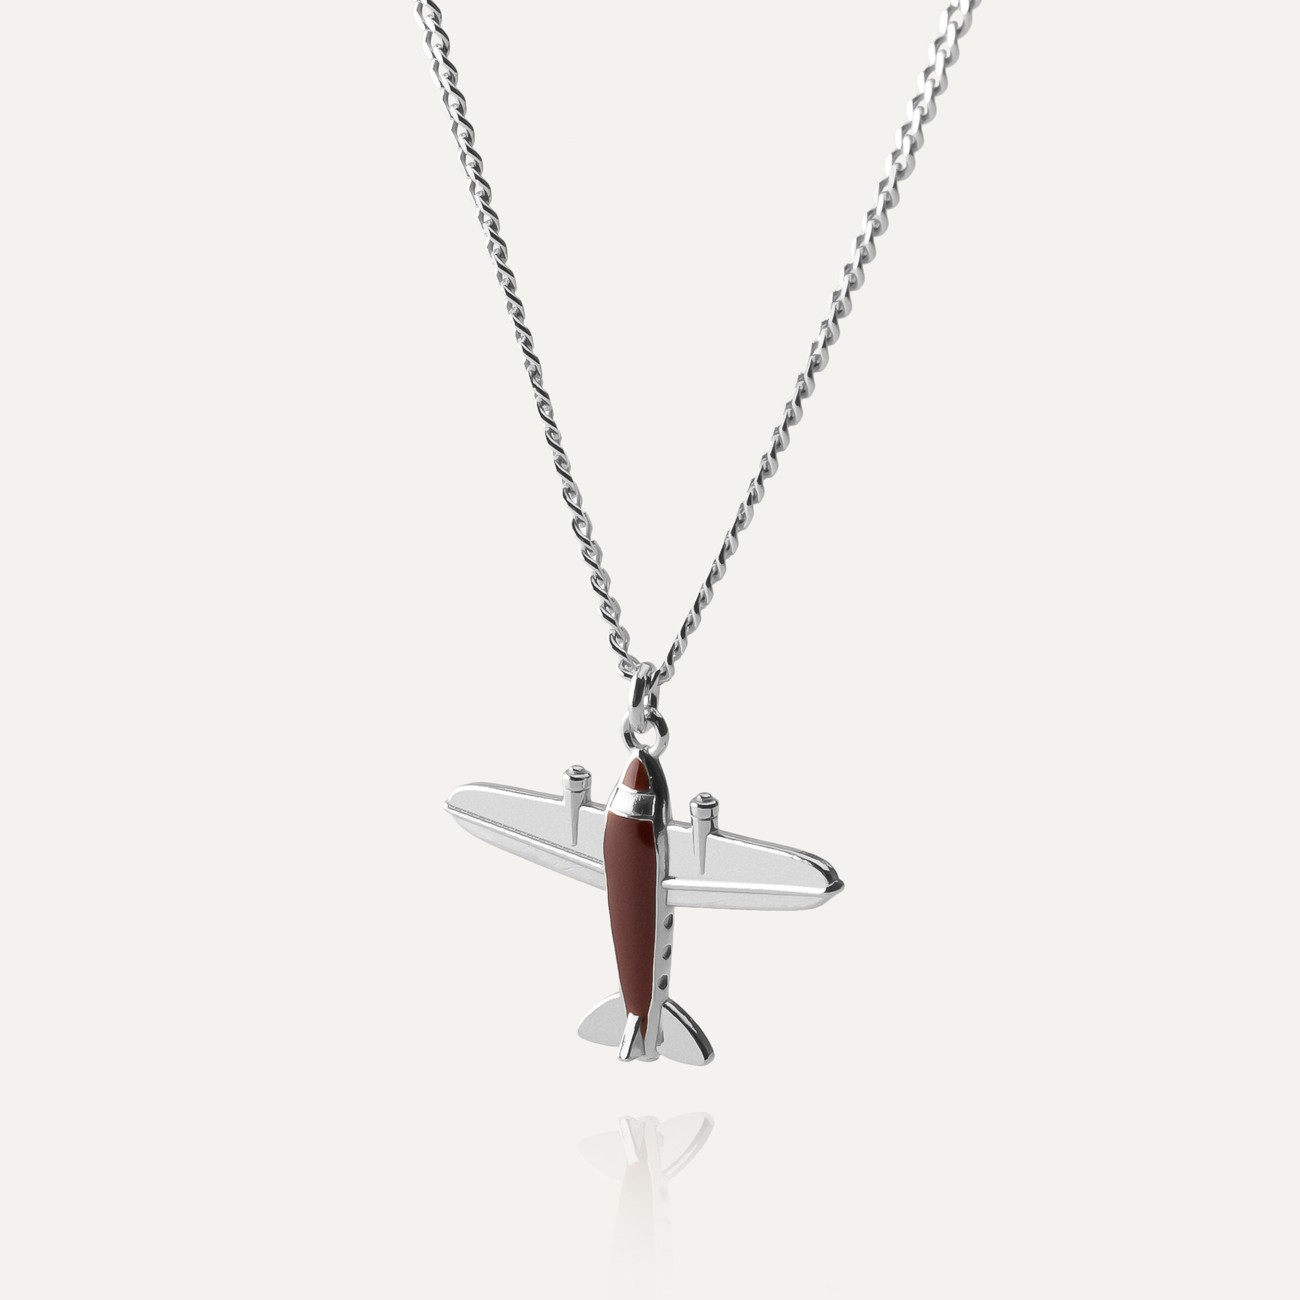 Airplane necklace, sterling silver 925